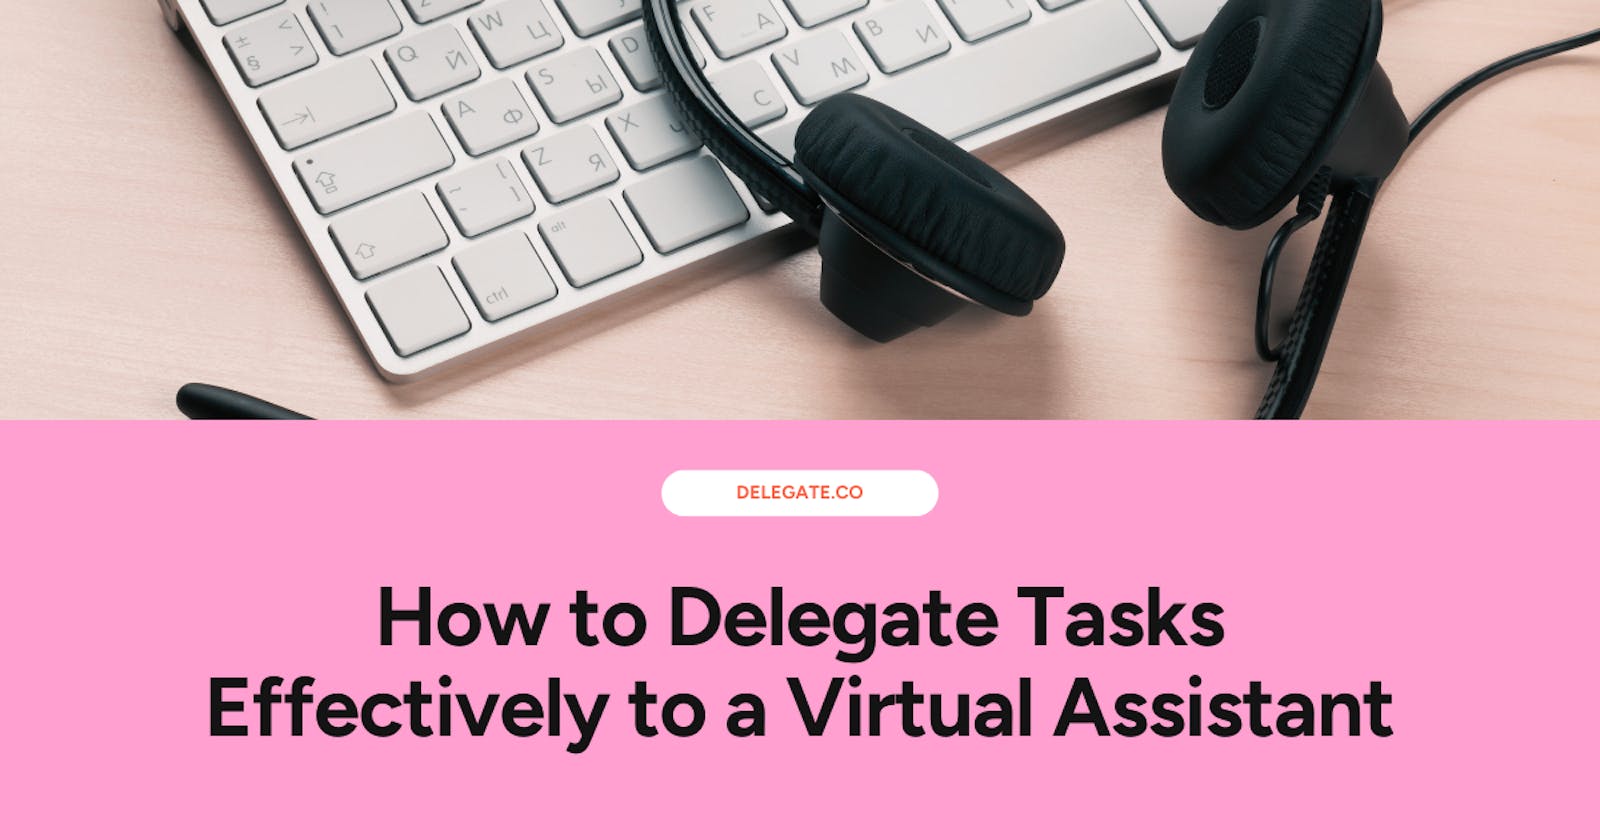 How to Delegate Tasks Effectively to a Virtual Assistant